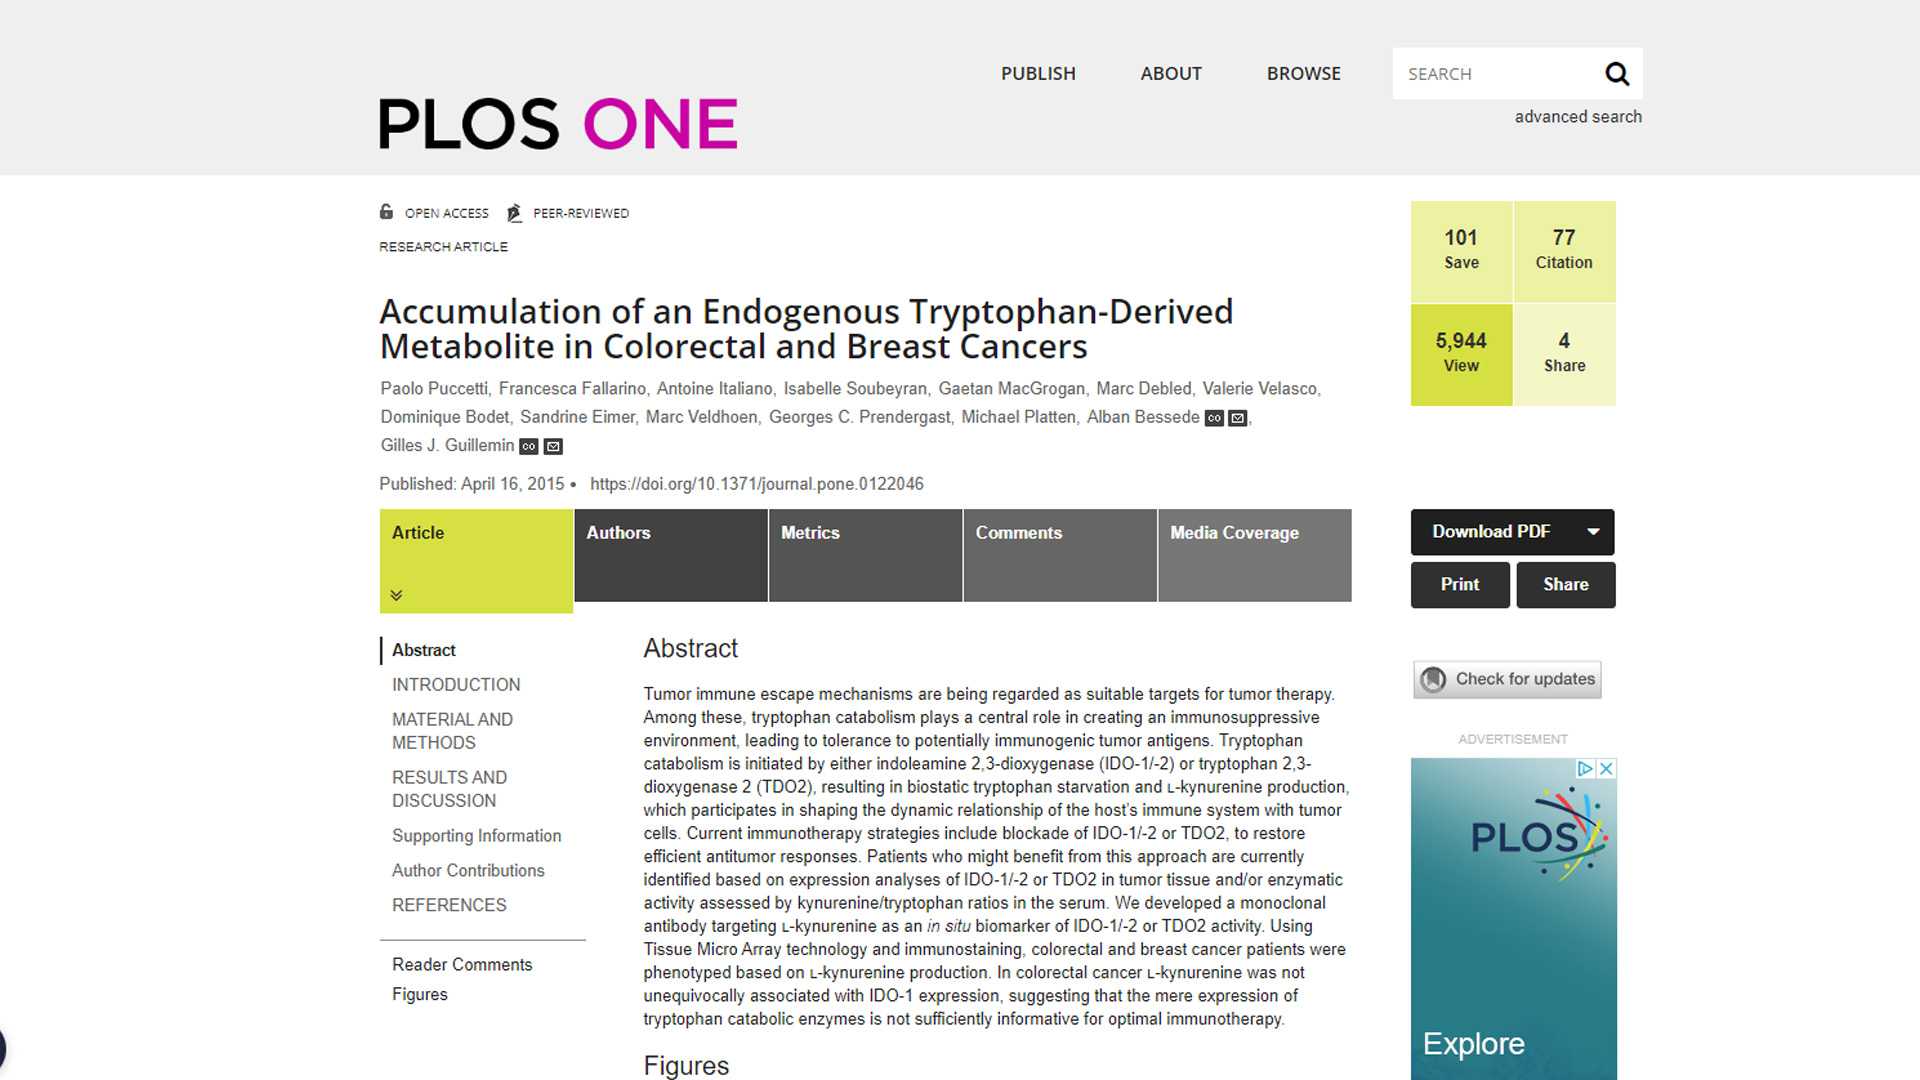 Accumulation of an Endogenous Tryptophan-Derived Metabolite in Colorectal and Breast Cancers